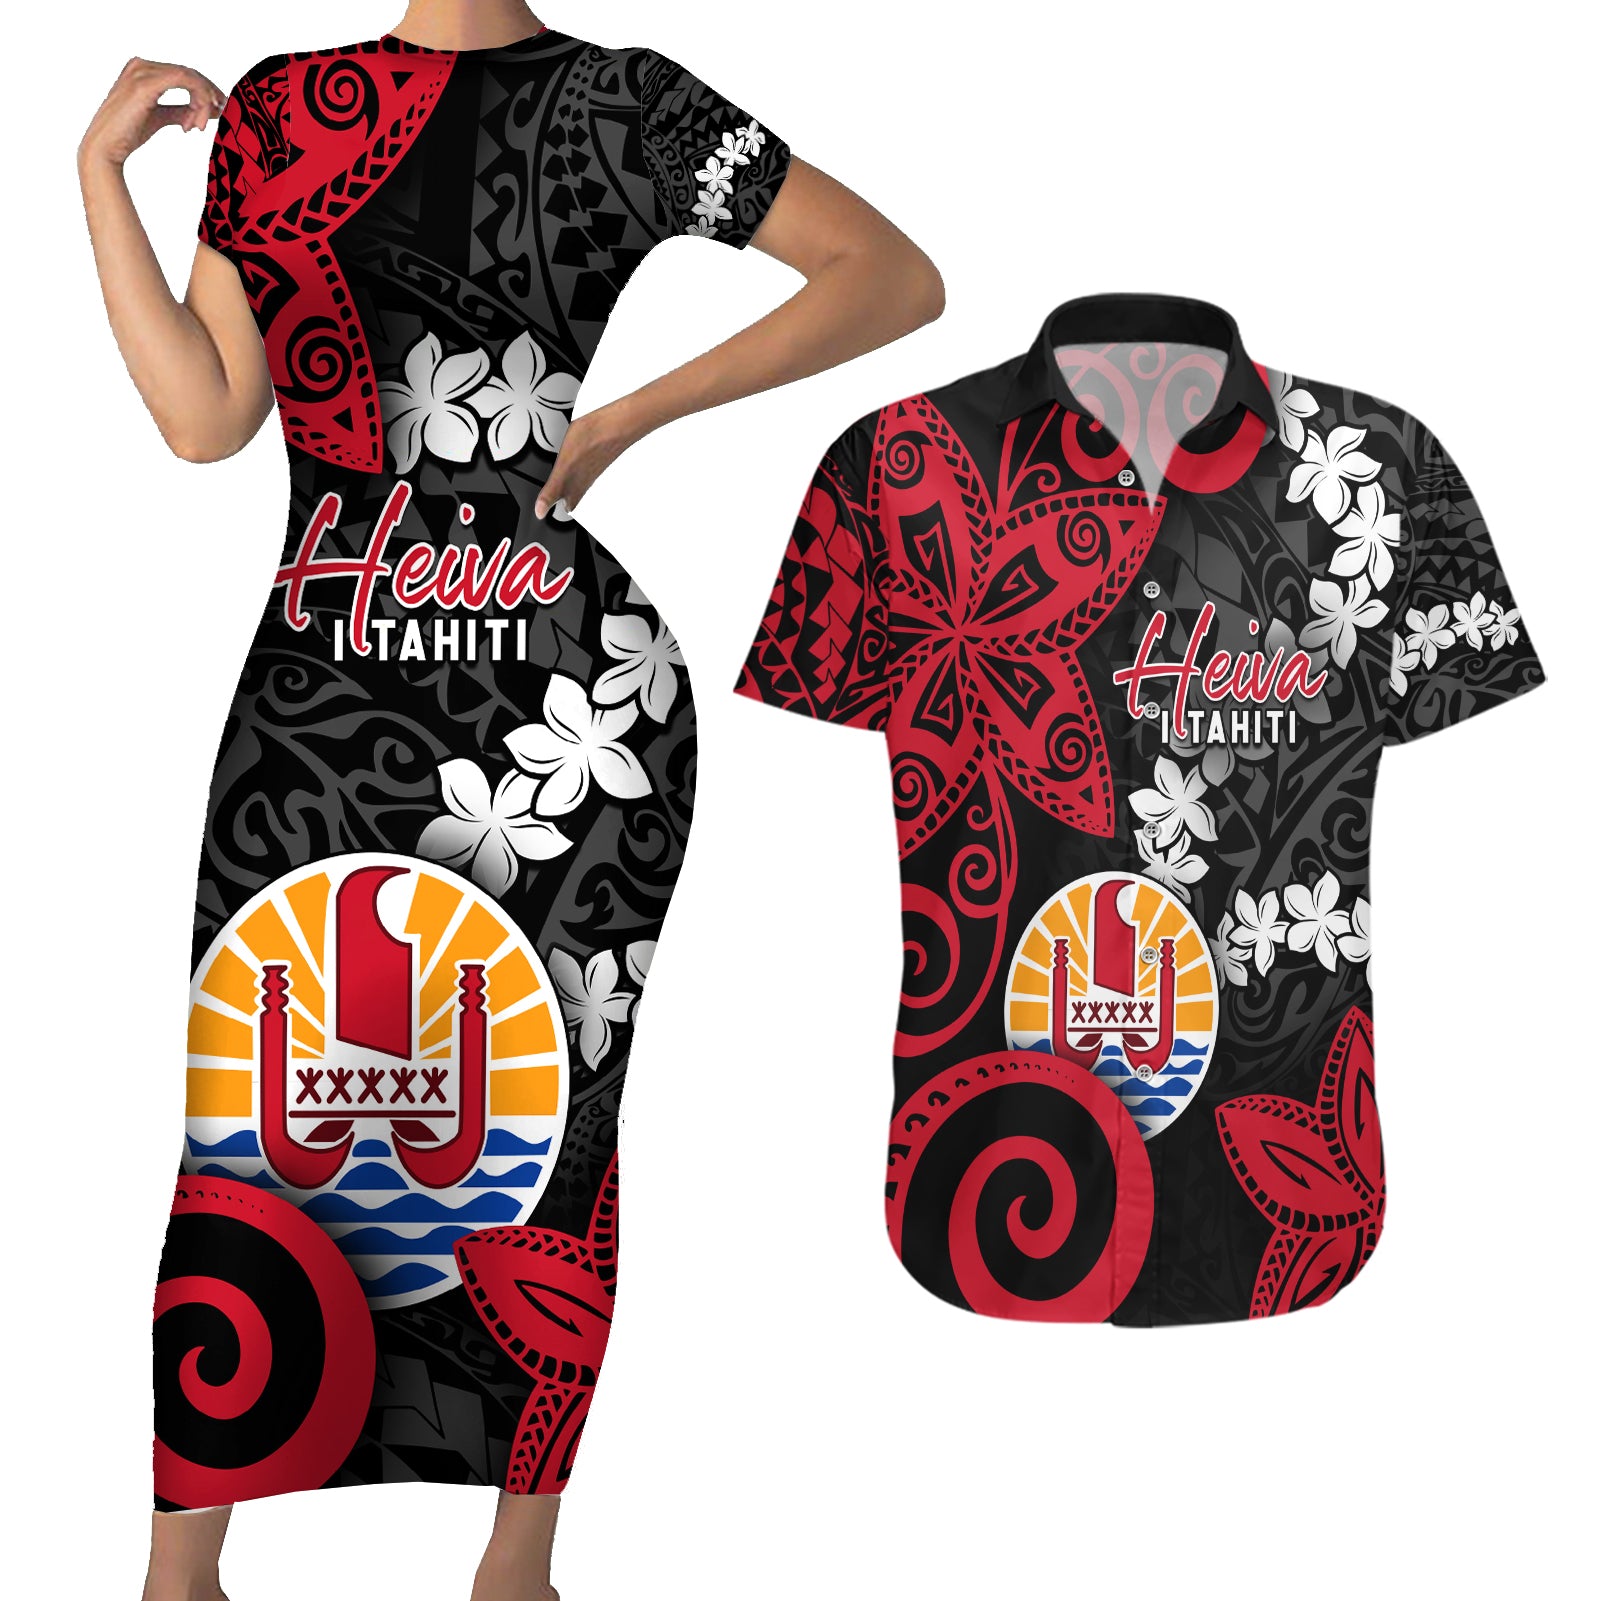 Tahiti Heiva Festival Couples Matching Short Sleeve Bodycon Dress and Hawaiian Shirt Floral Pattern With Coat Of Arms